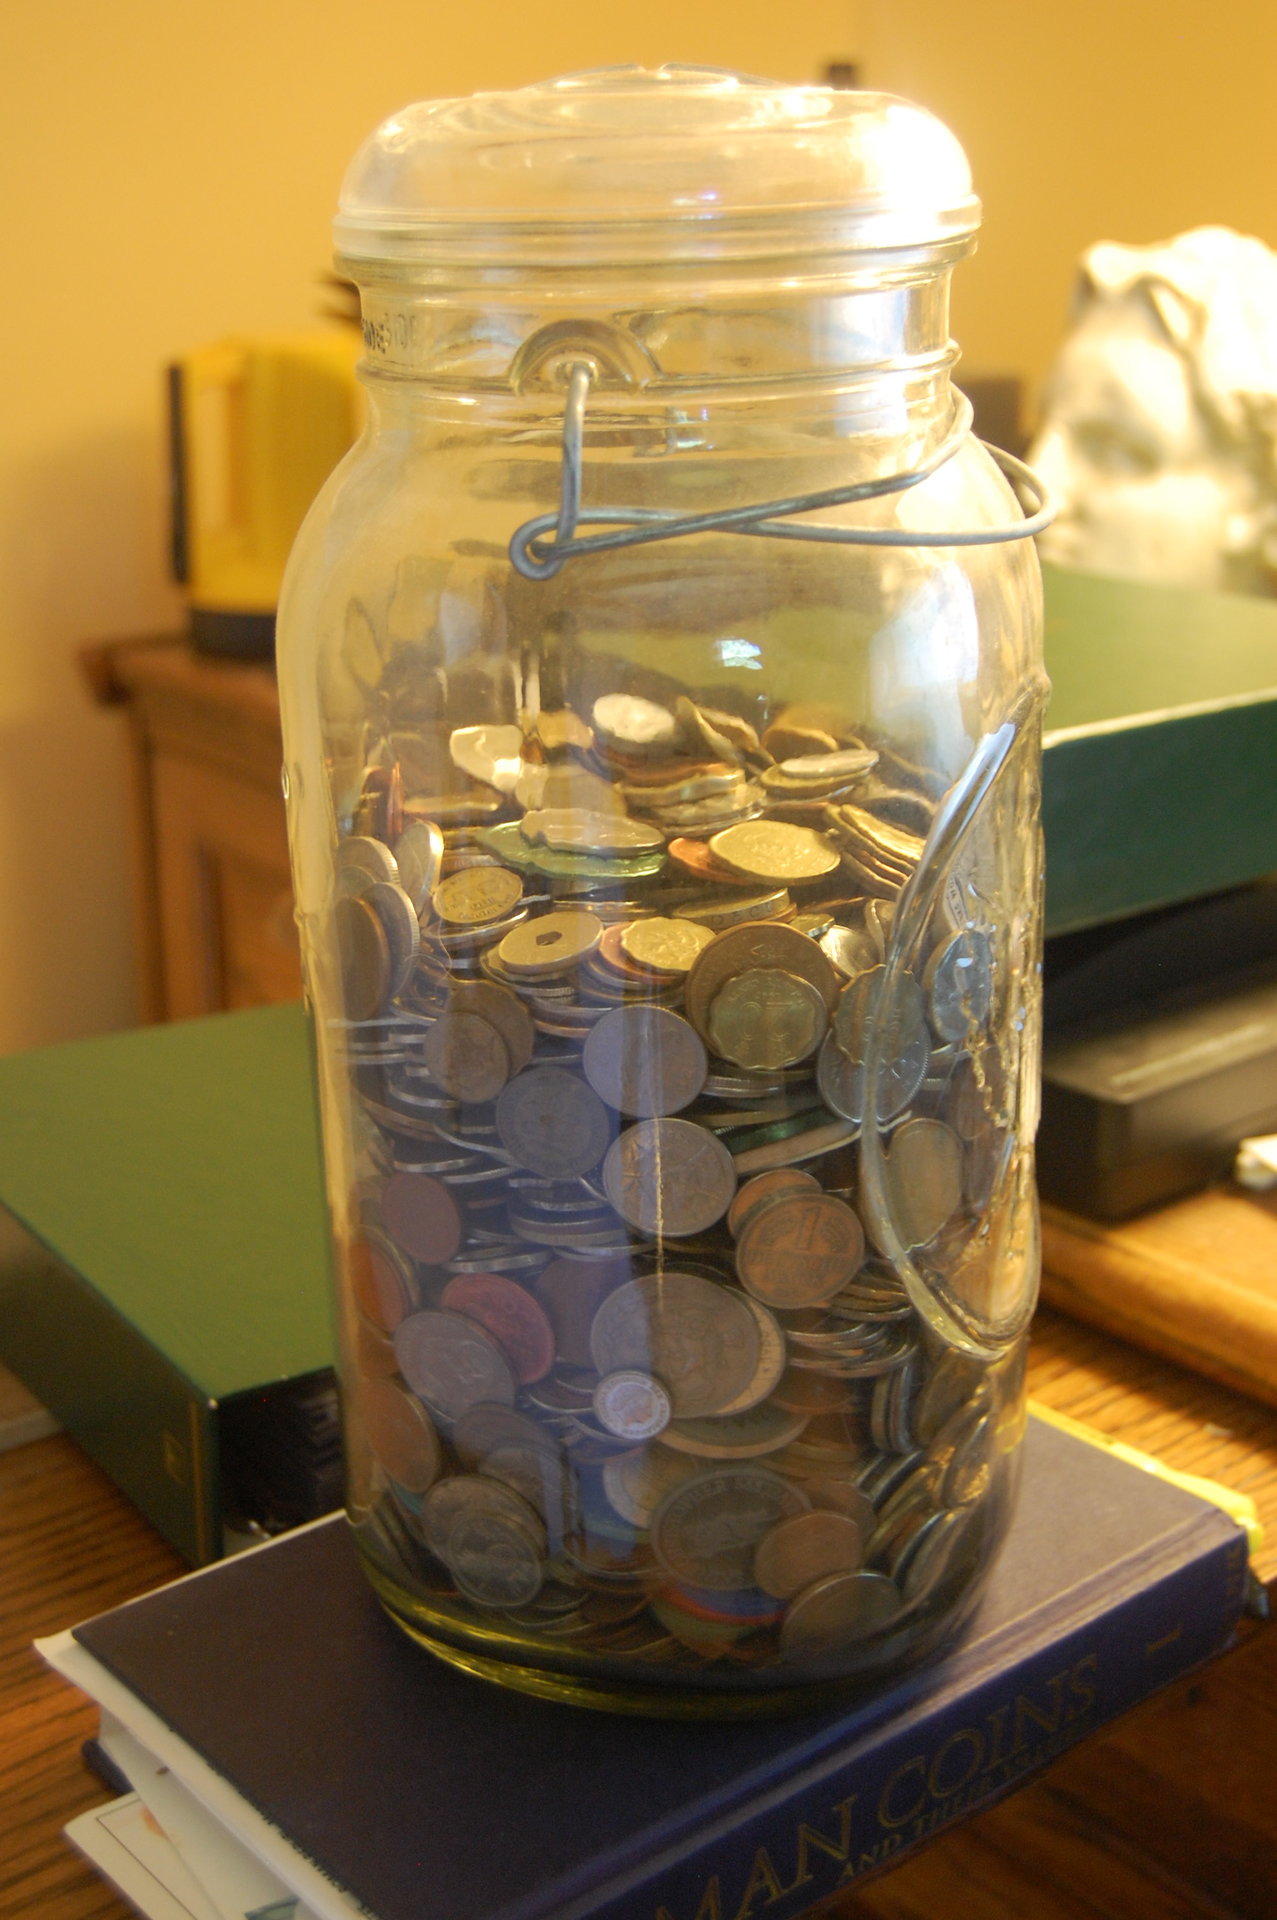 My World Coins - kept from travels.jpg